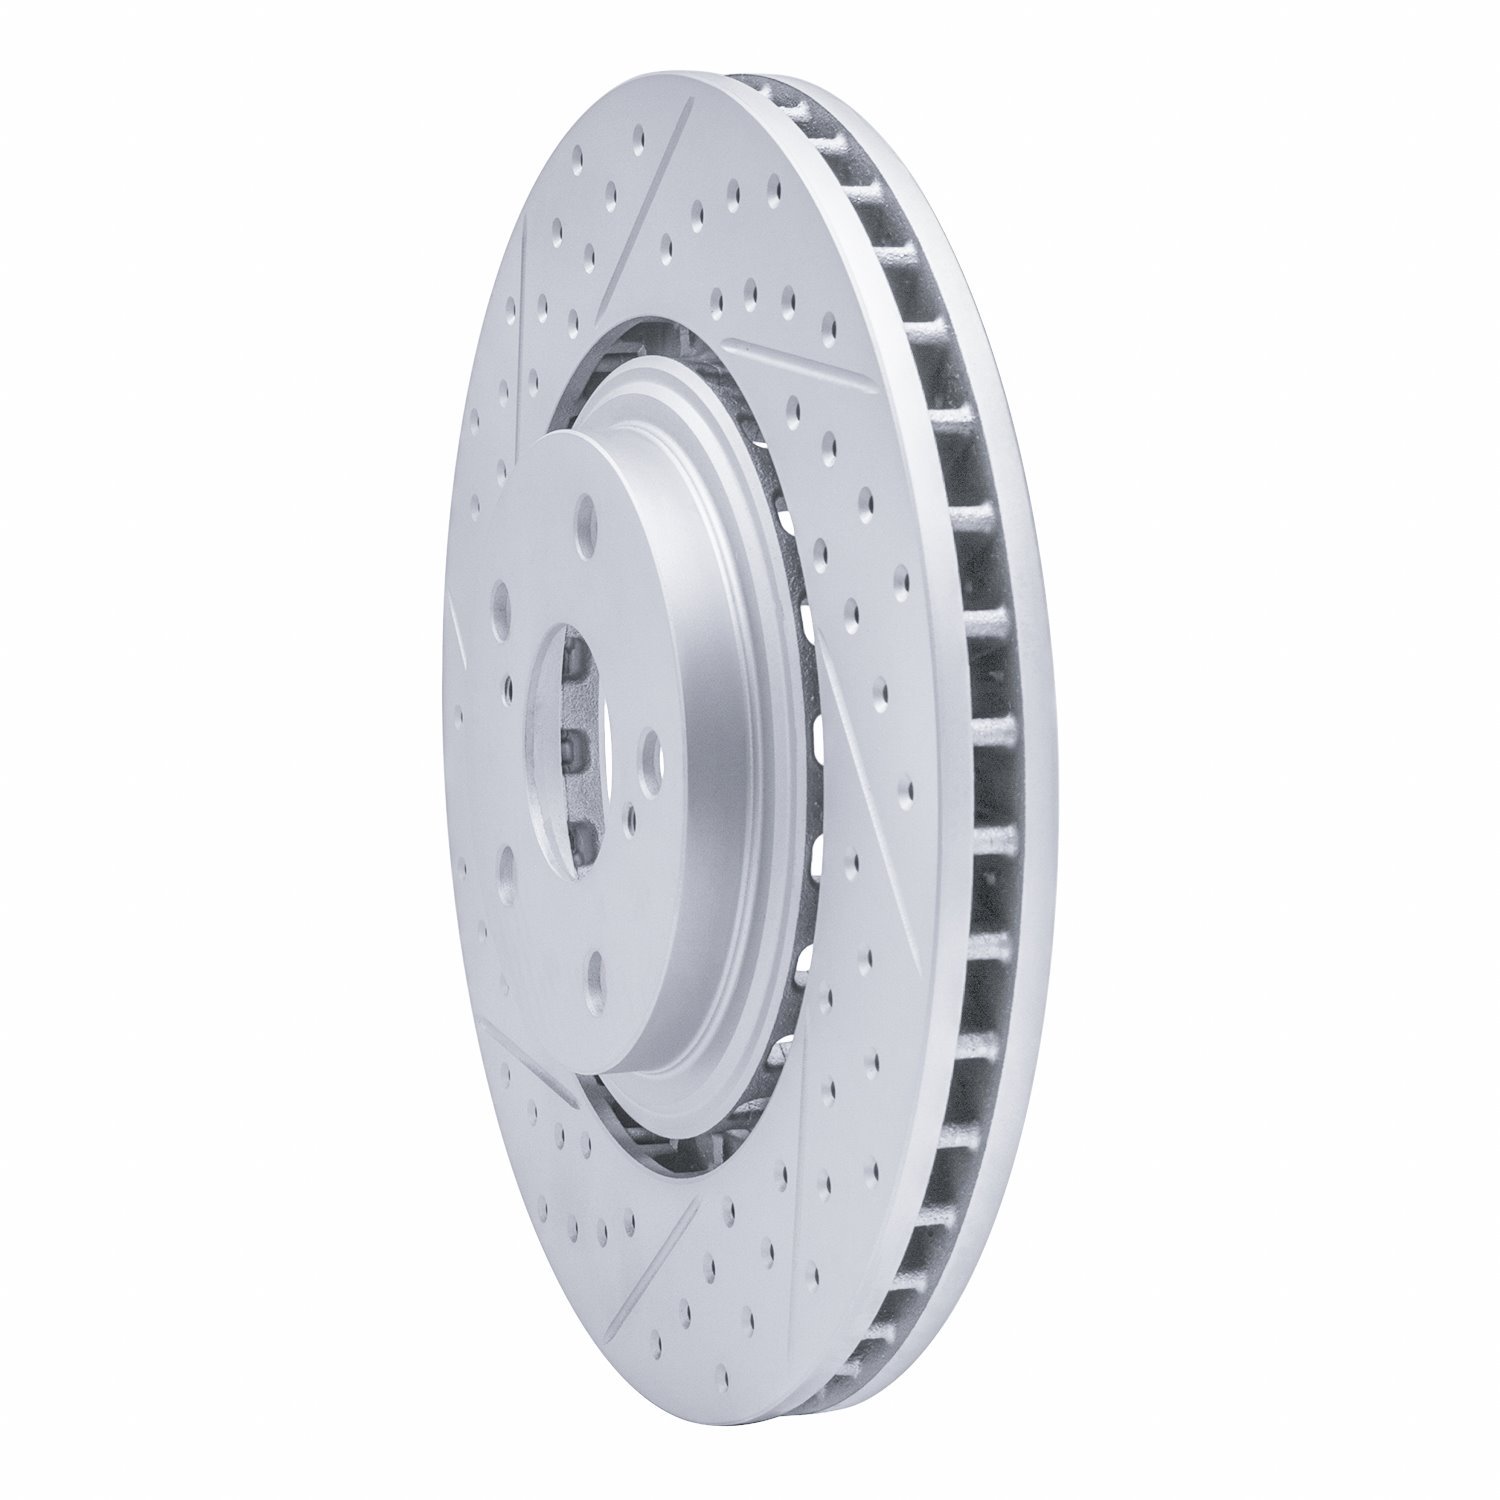 830-76138L Geoperformance Drilled/Slotted Brake Rotor, Fits Select Lexus/Toyota/Scion, Position: Front Left